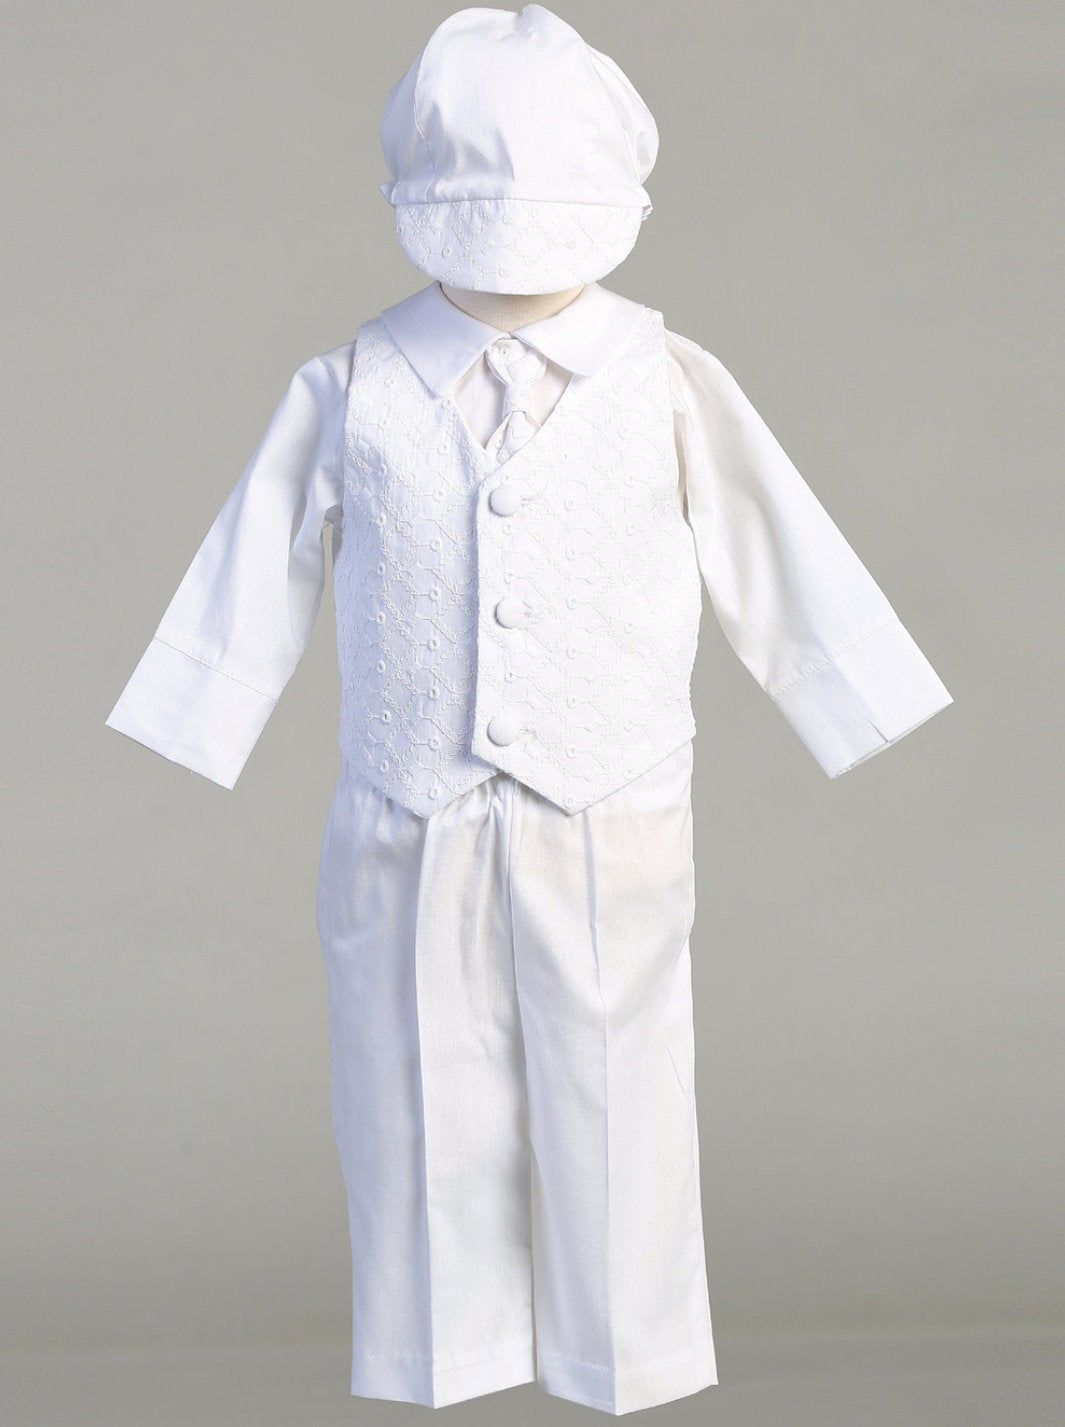 Corey - Baby Boys Baptism & Christening Outfit w/ Pants, Blessing Suit